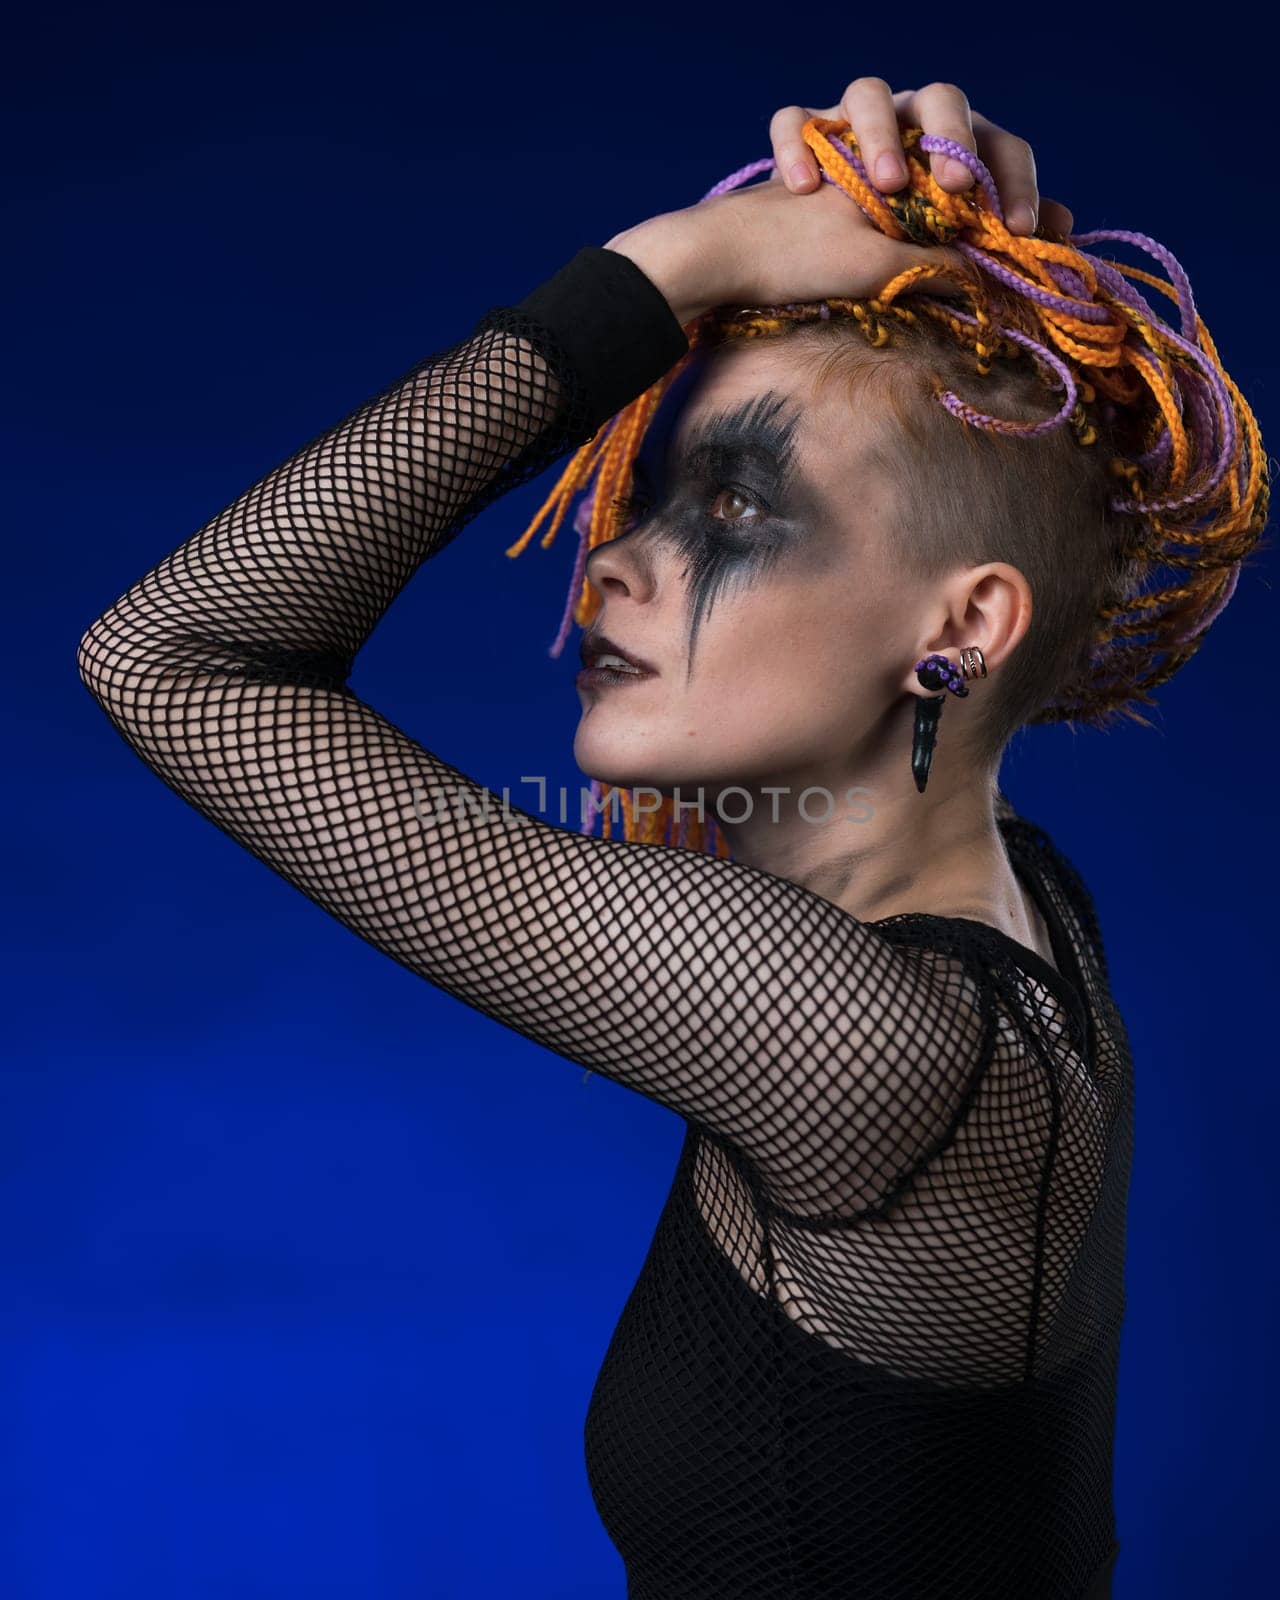 Cinematic portrait of beauty woman with colored braids hairdo, spooky stage make-up painted on face by Alexander-Piragis